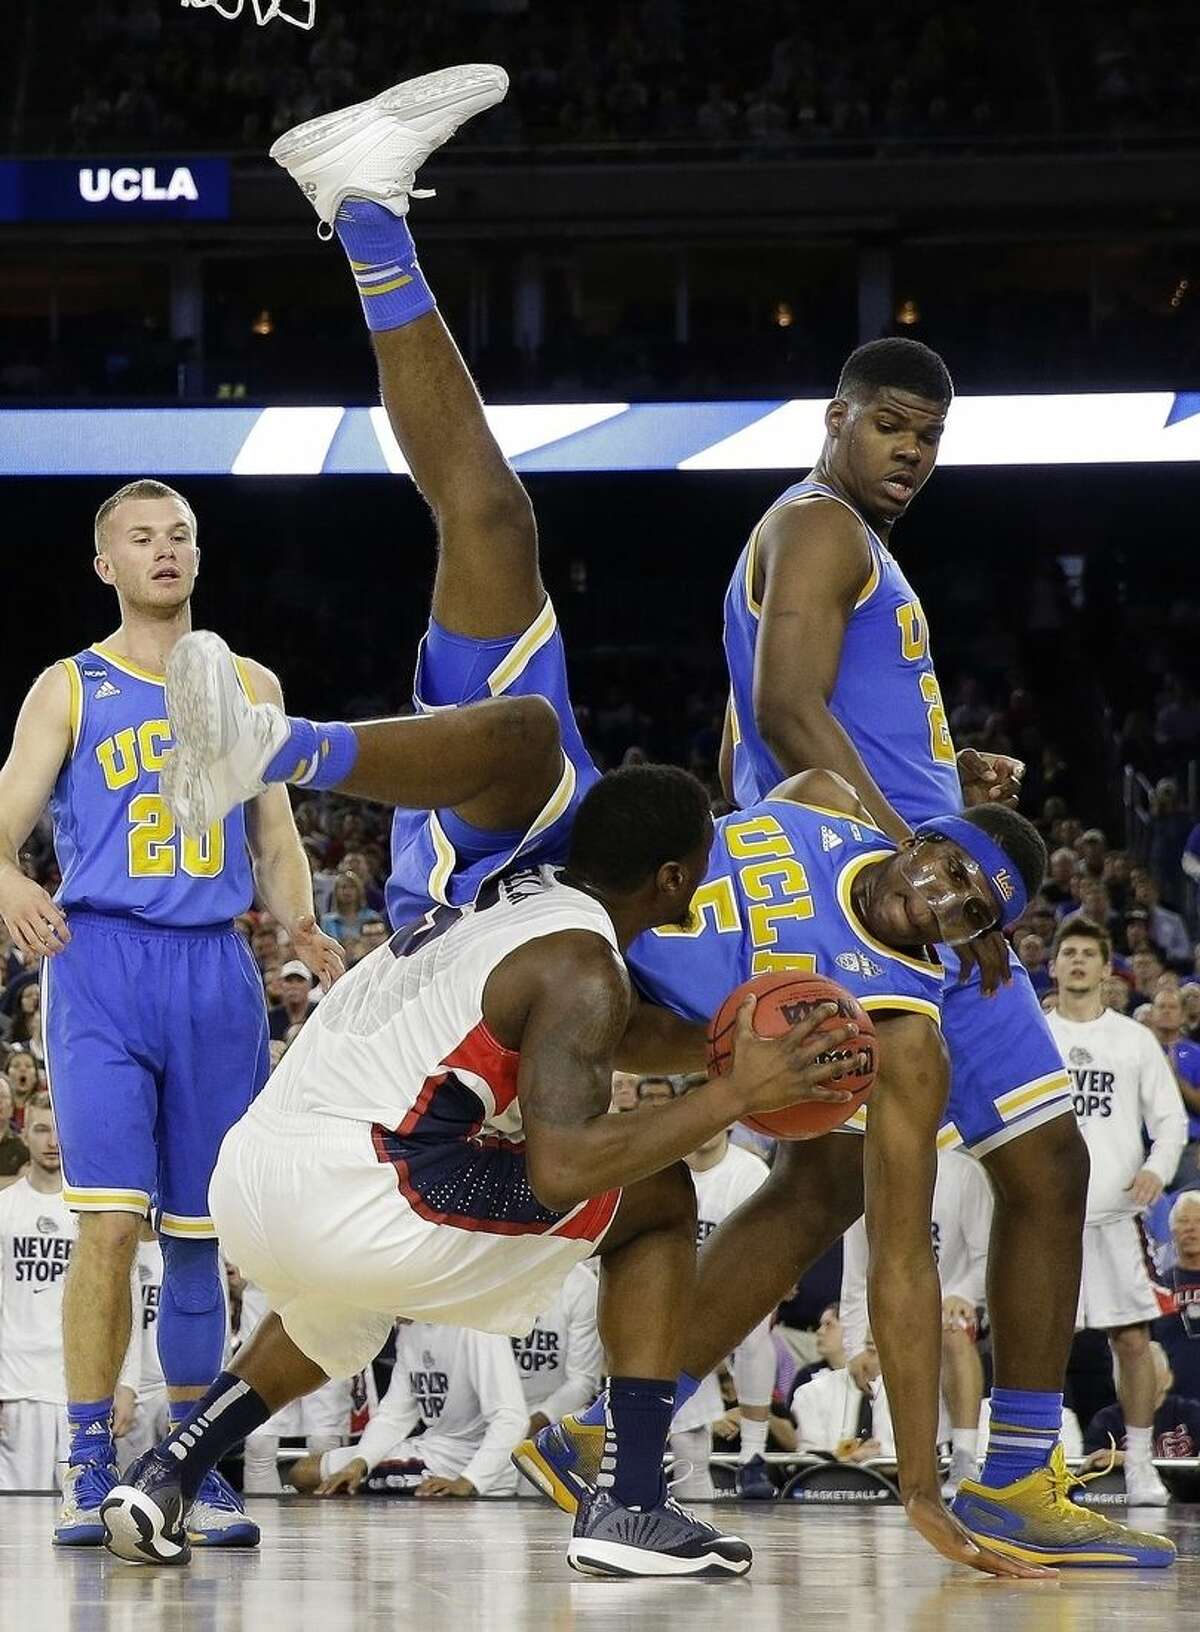 UCLA's Kevon Looney (5) falls over Gonzaga's Gary Bell Jr. during the second half of a college basketball regional semifinal game in the NCAA Tournament Friday, March 27, 2015, in Houston. (AP Photo/David J. Phillip)